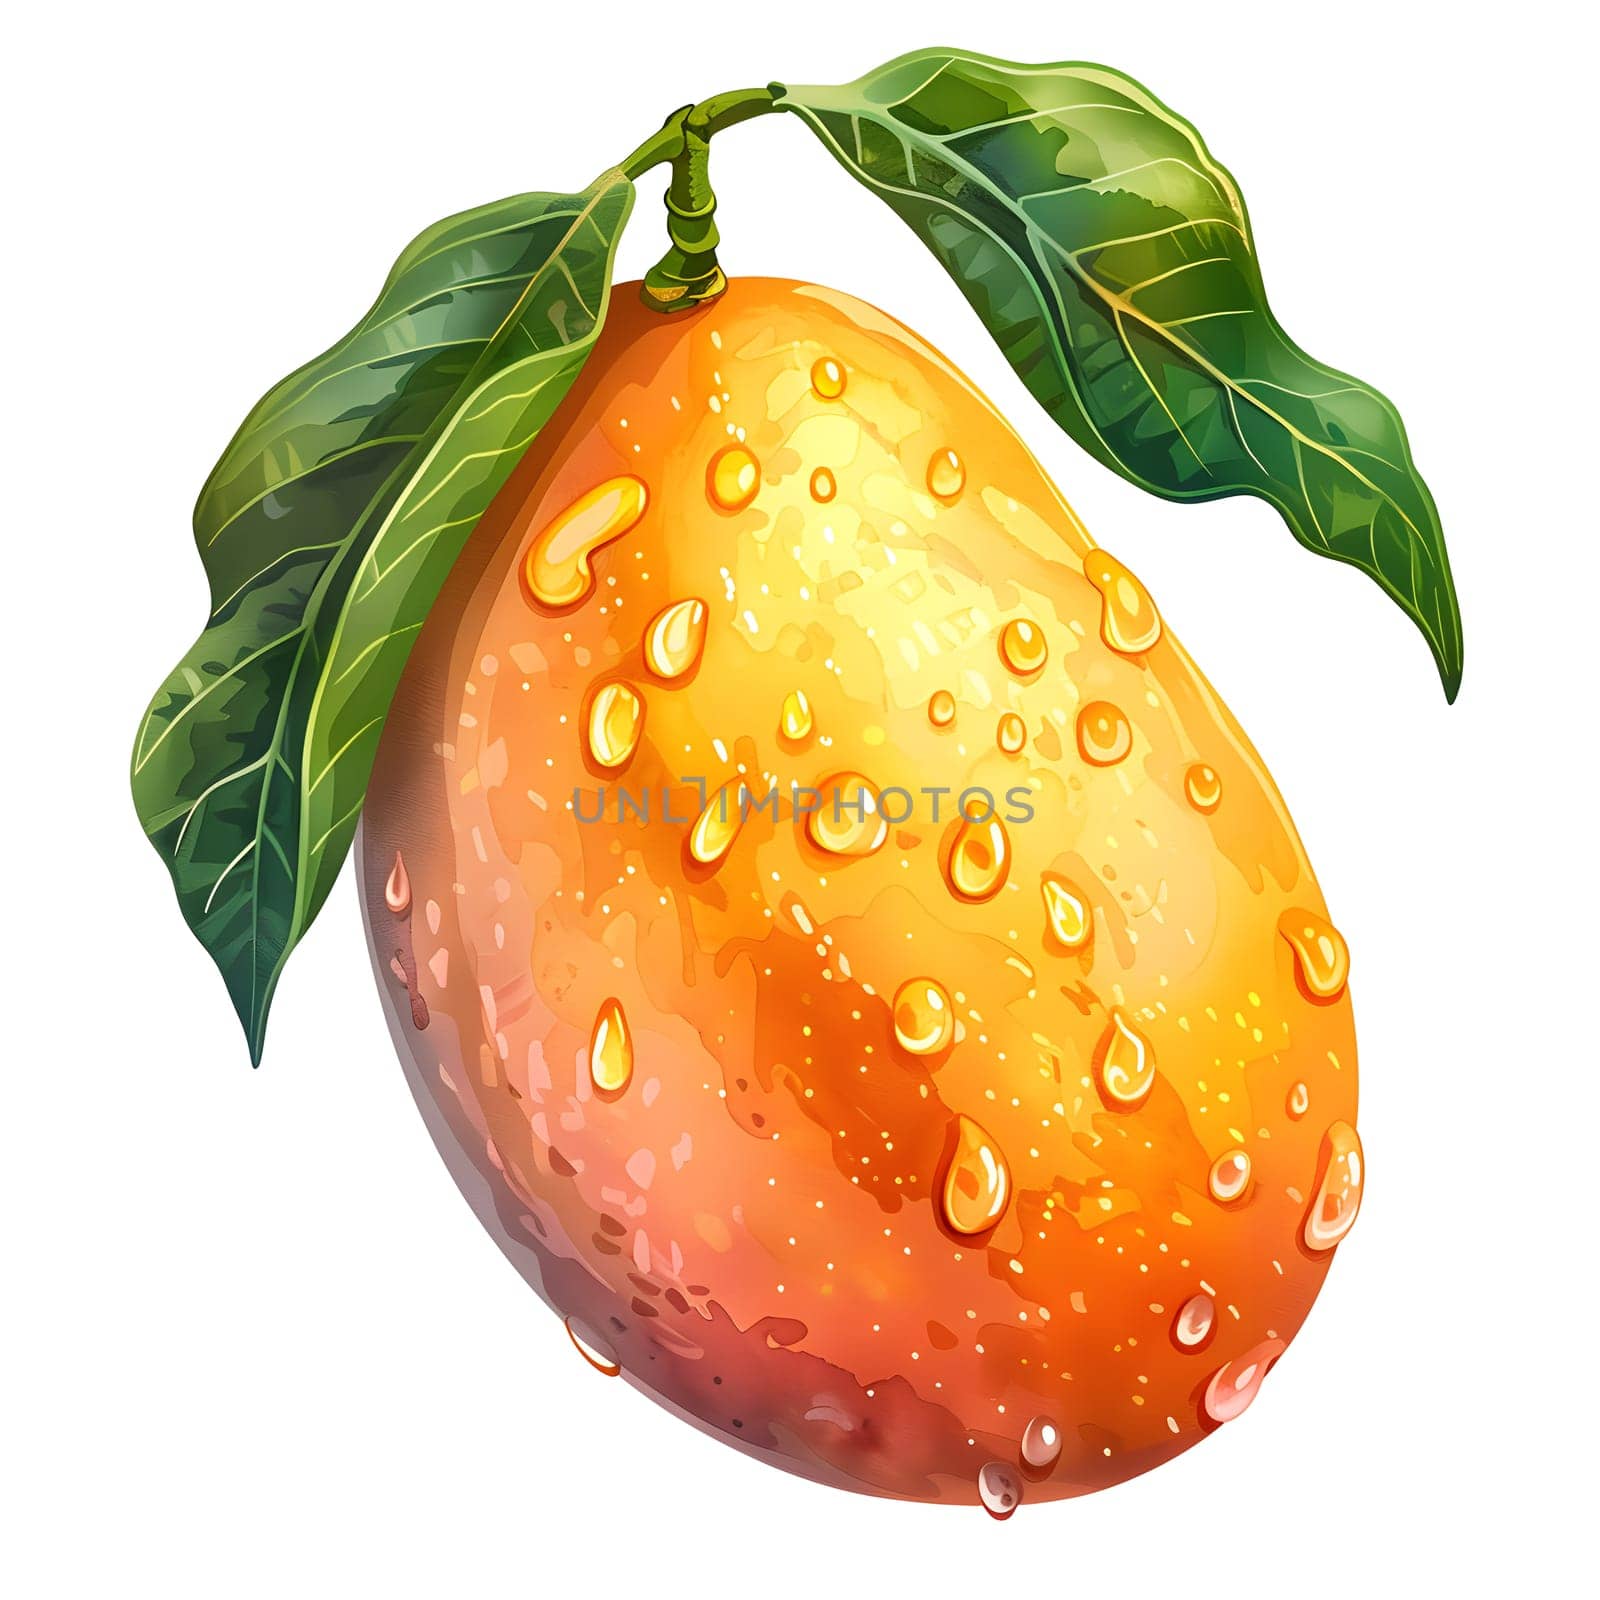 A seedless fruit, the mango is a natural food with water drops on its vibrant skin and green leaves, making it a refreshing ingredient in a variety of dishes